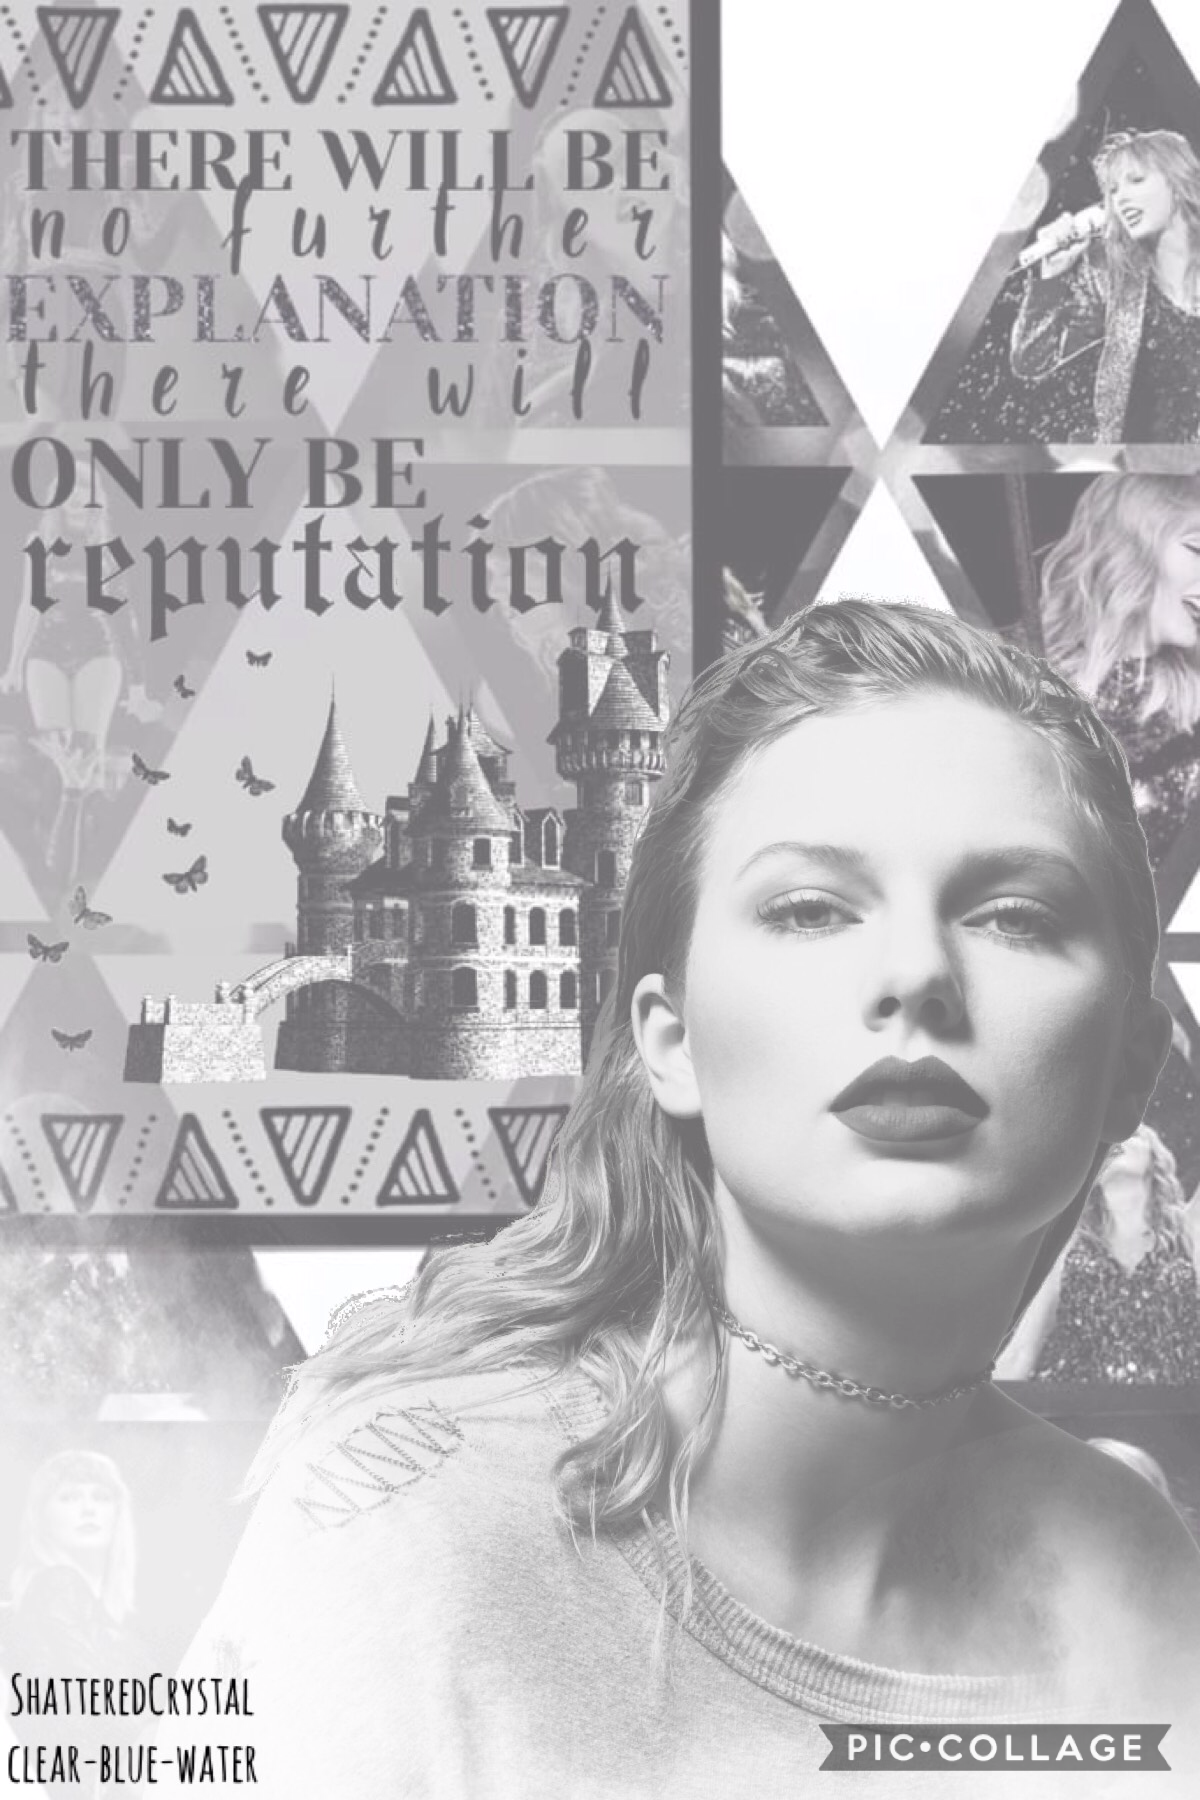 Collab with...
ShatteredCrystal. She is such a great collager who deserves so much love
QOTD: How long have you been a Swiftie?
AOTD: Since 2010💕💕💕💕💕